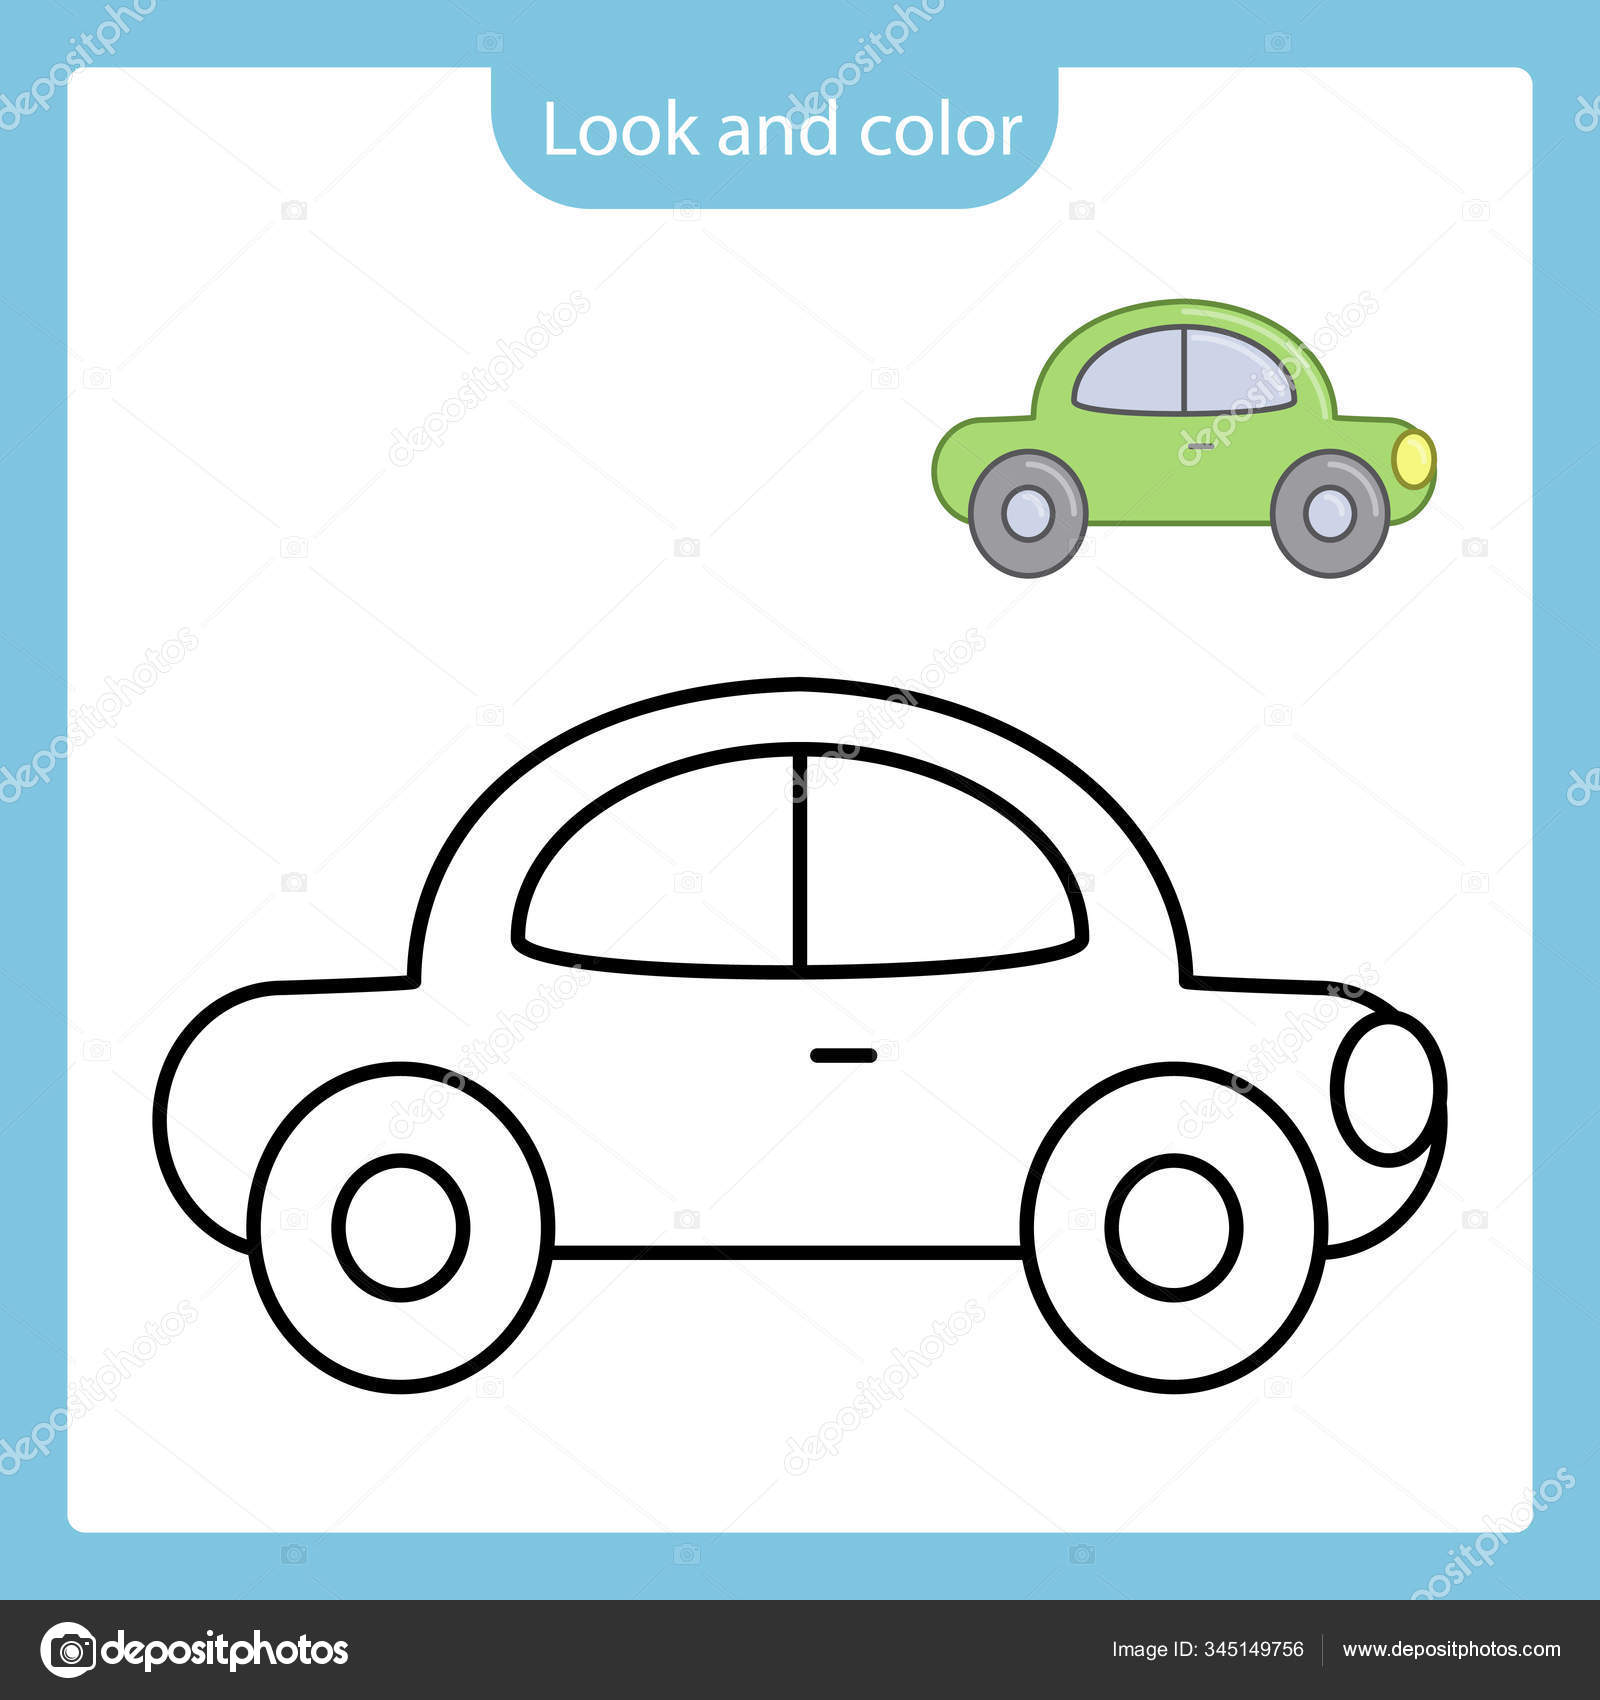 Coloring page outline of car toy with example.   Vektorgrafik ...